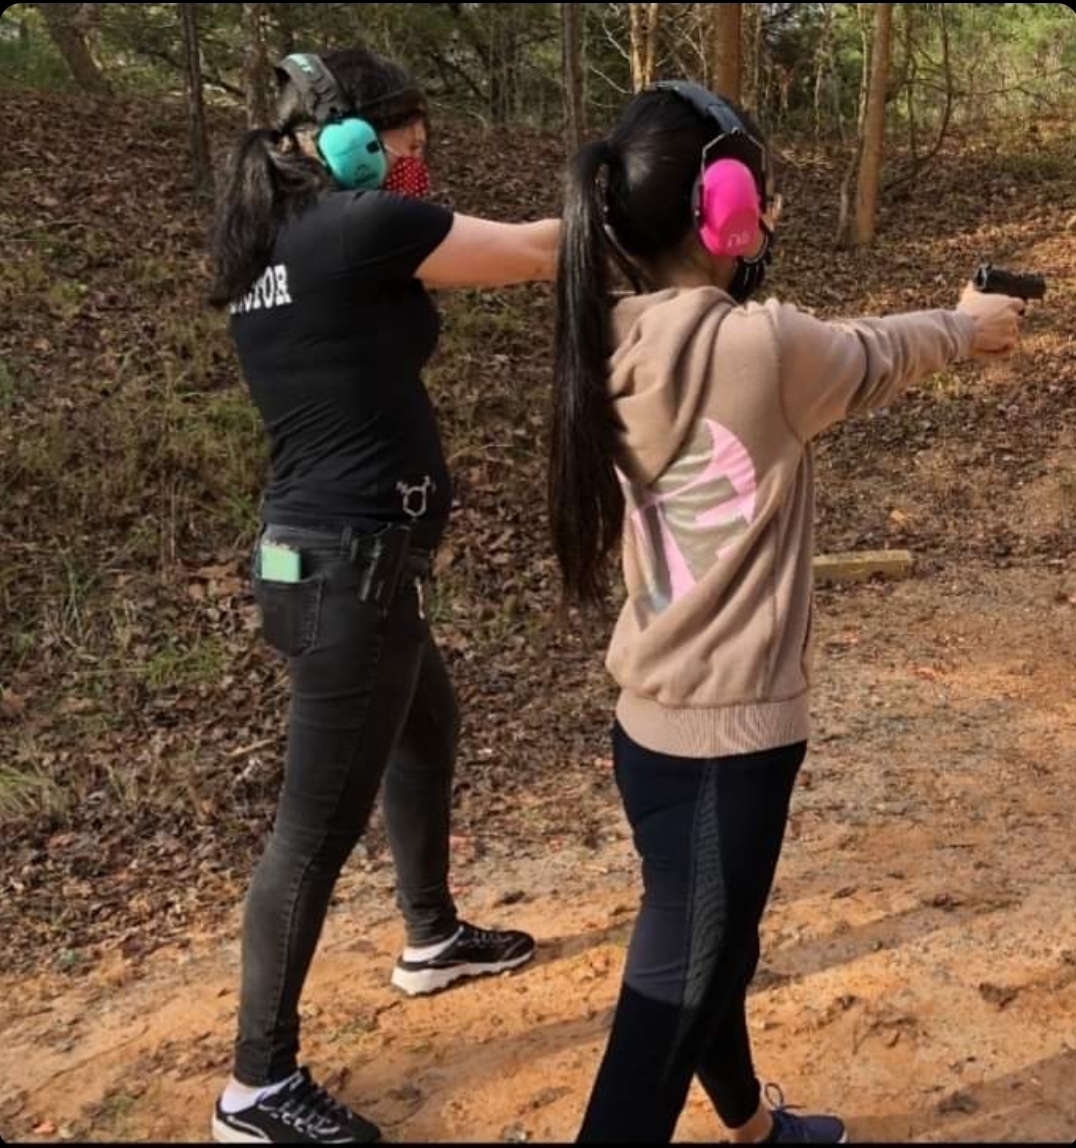 Clara Elliot and student (left to right) stand on a firing line aiming handguns at a target that is out of frame.